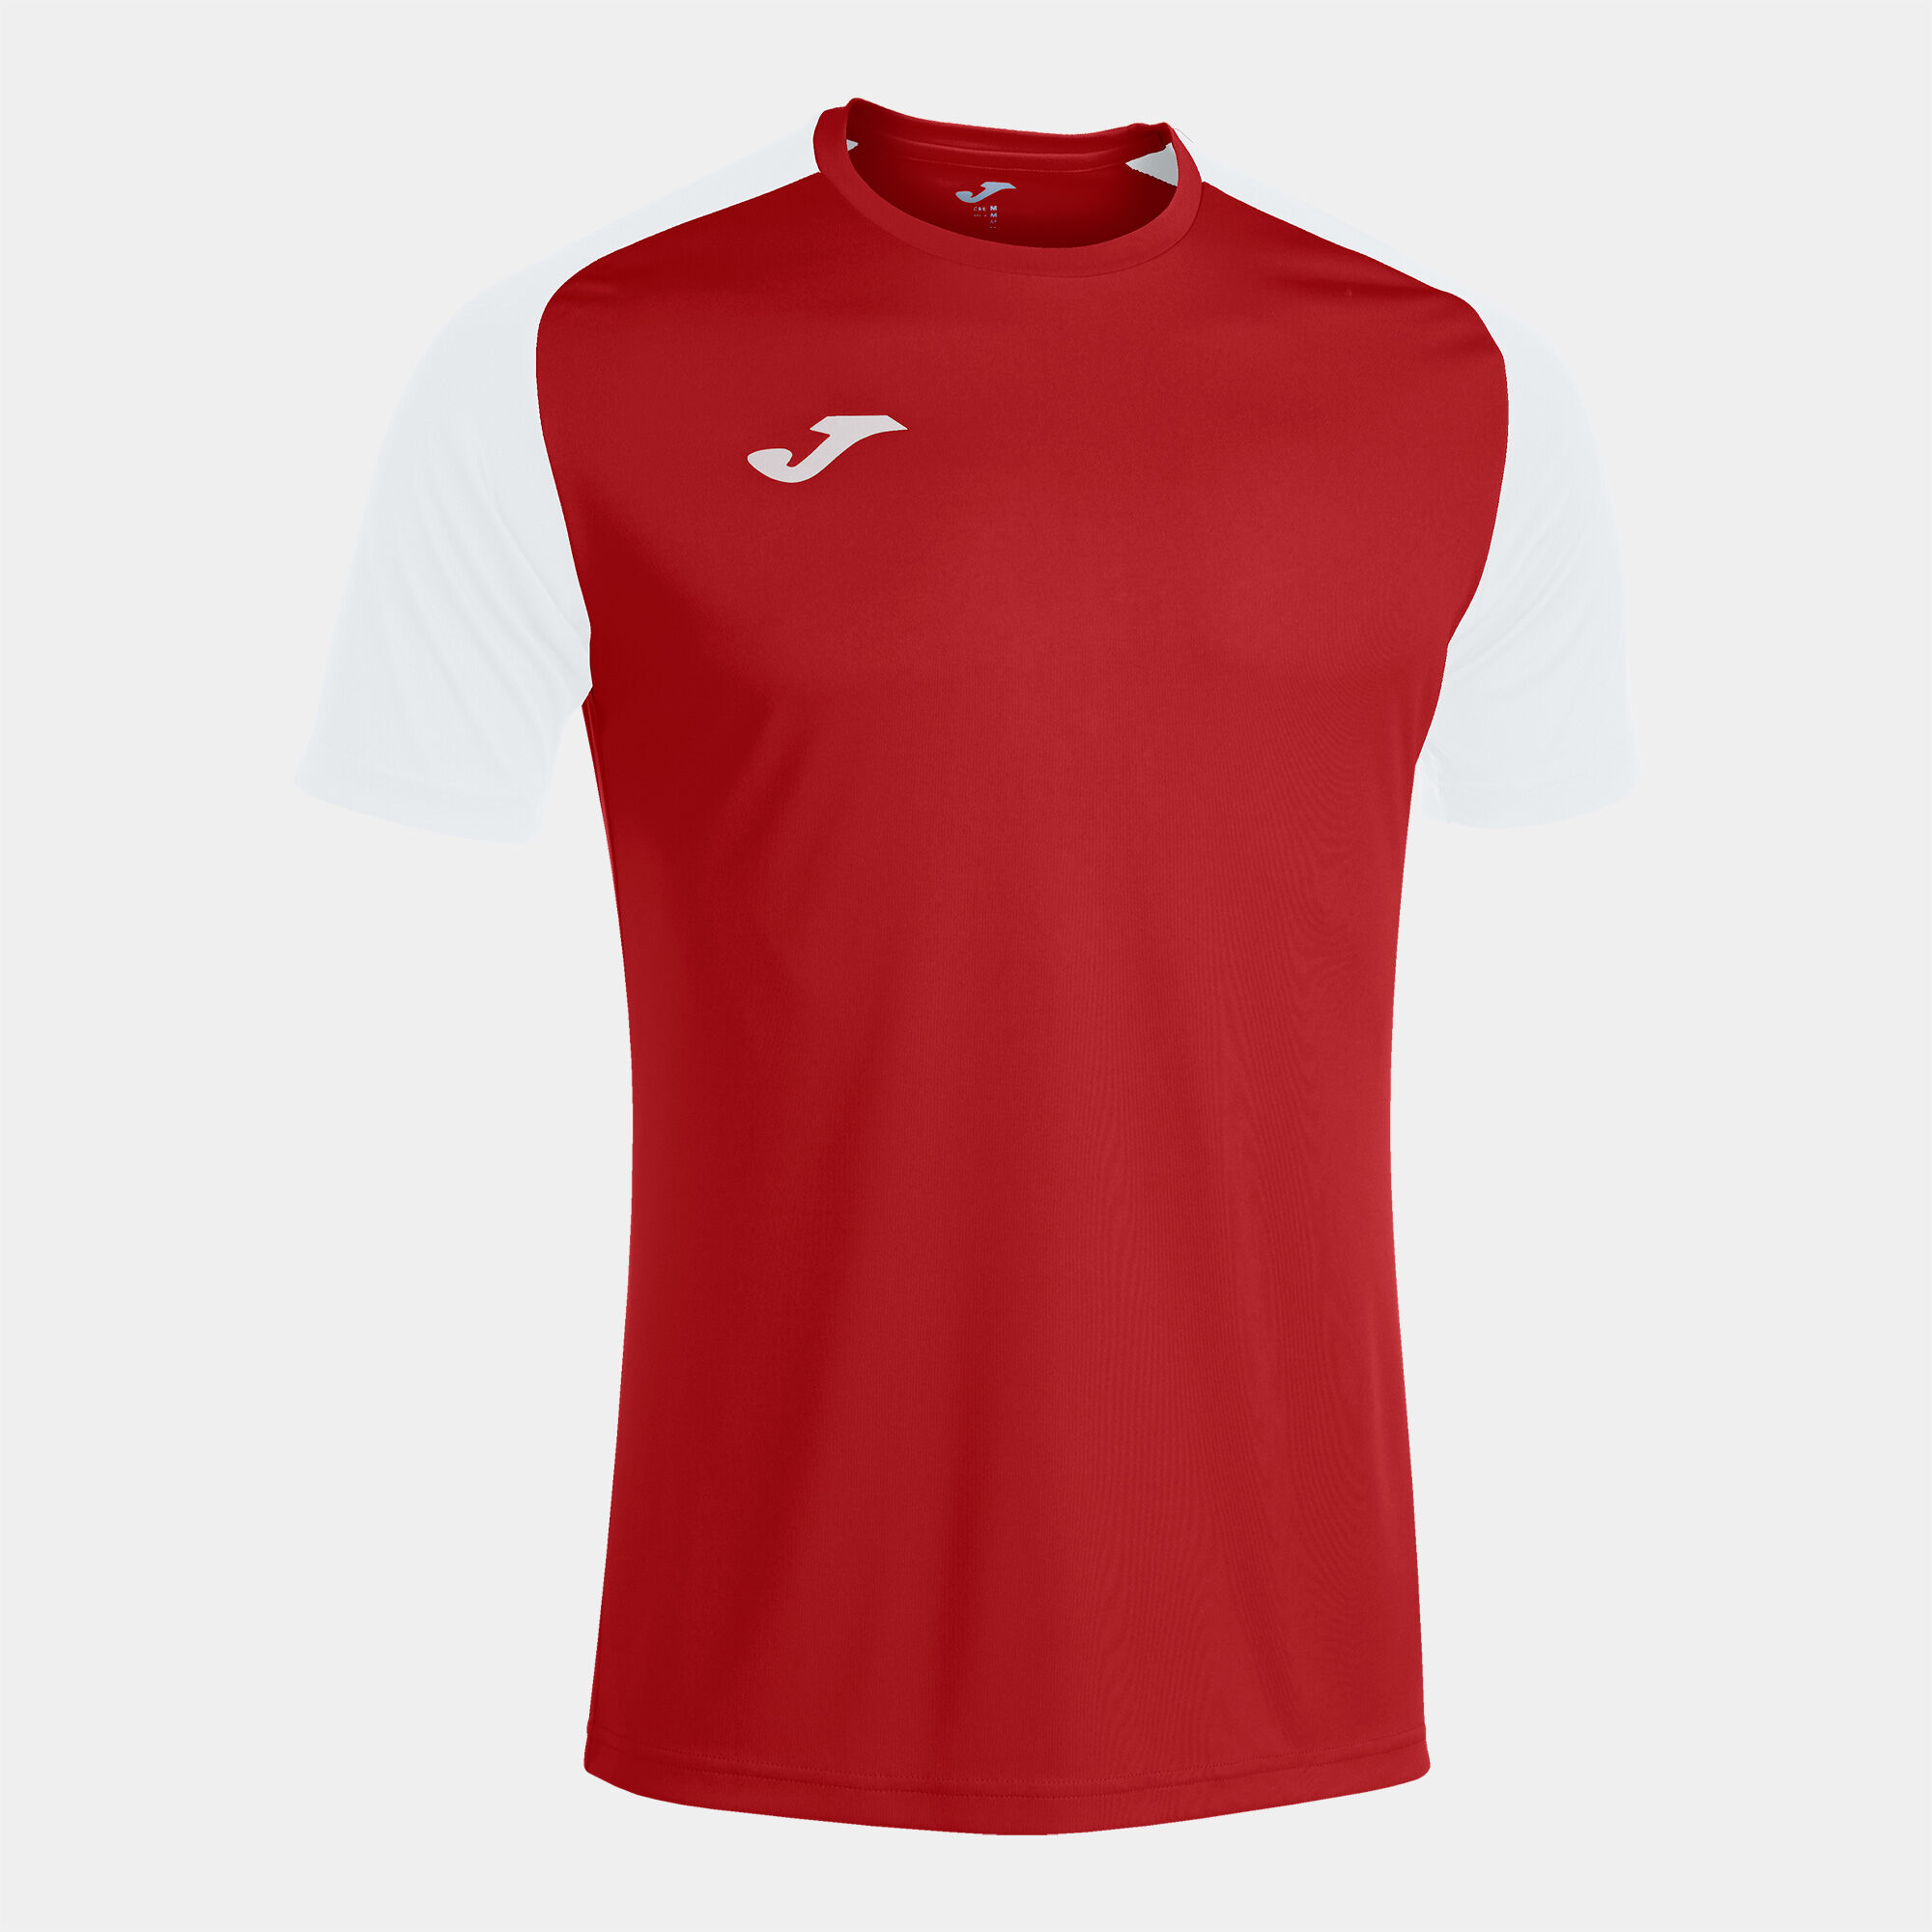 MAILLOT MANCHES COURTES HOMME ACADEMY IV ROUGE BLANC